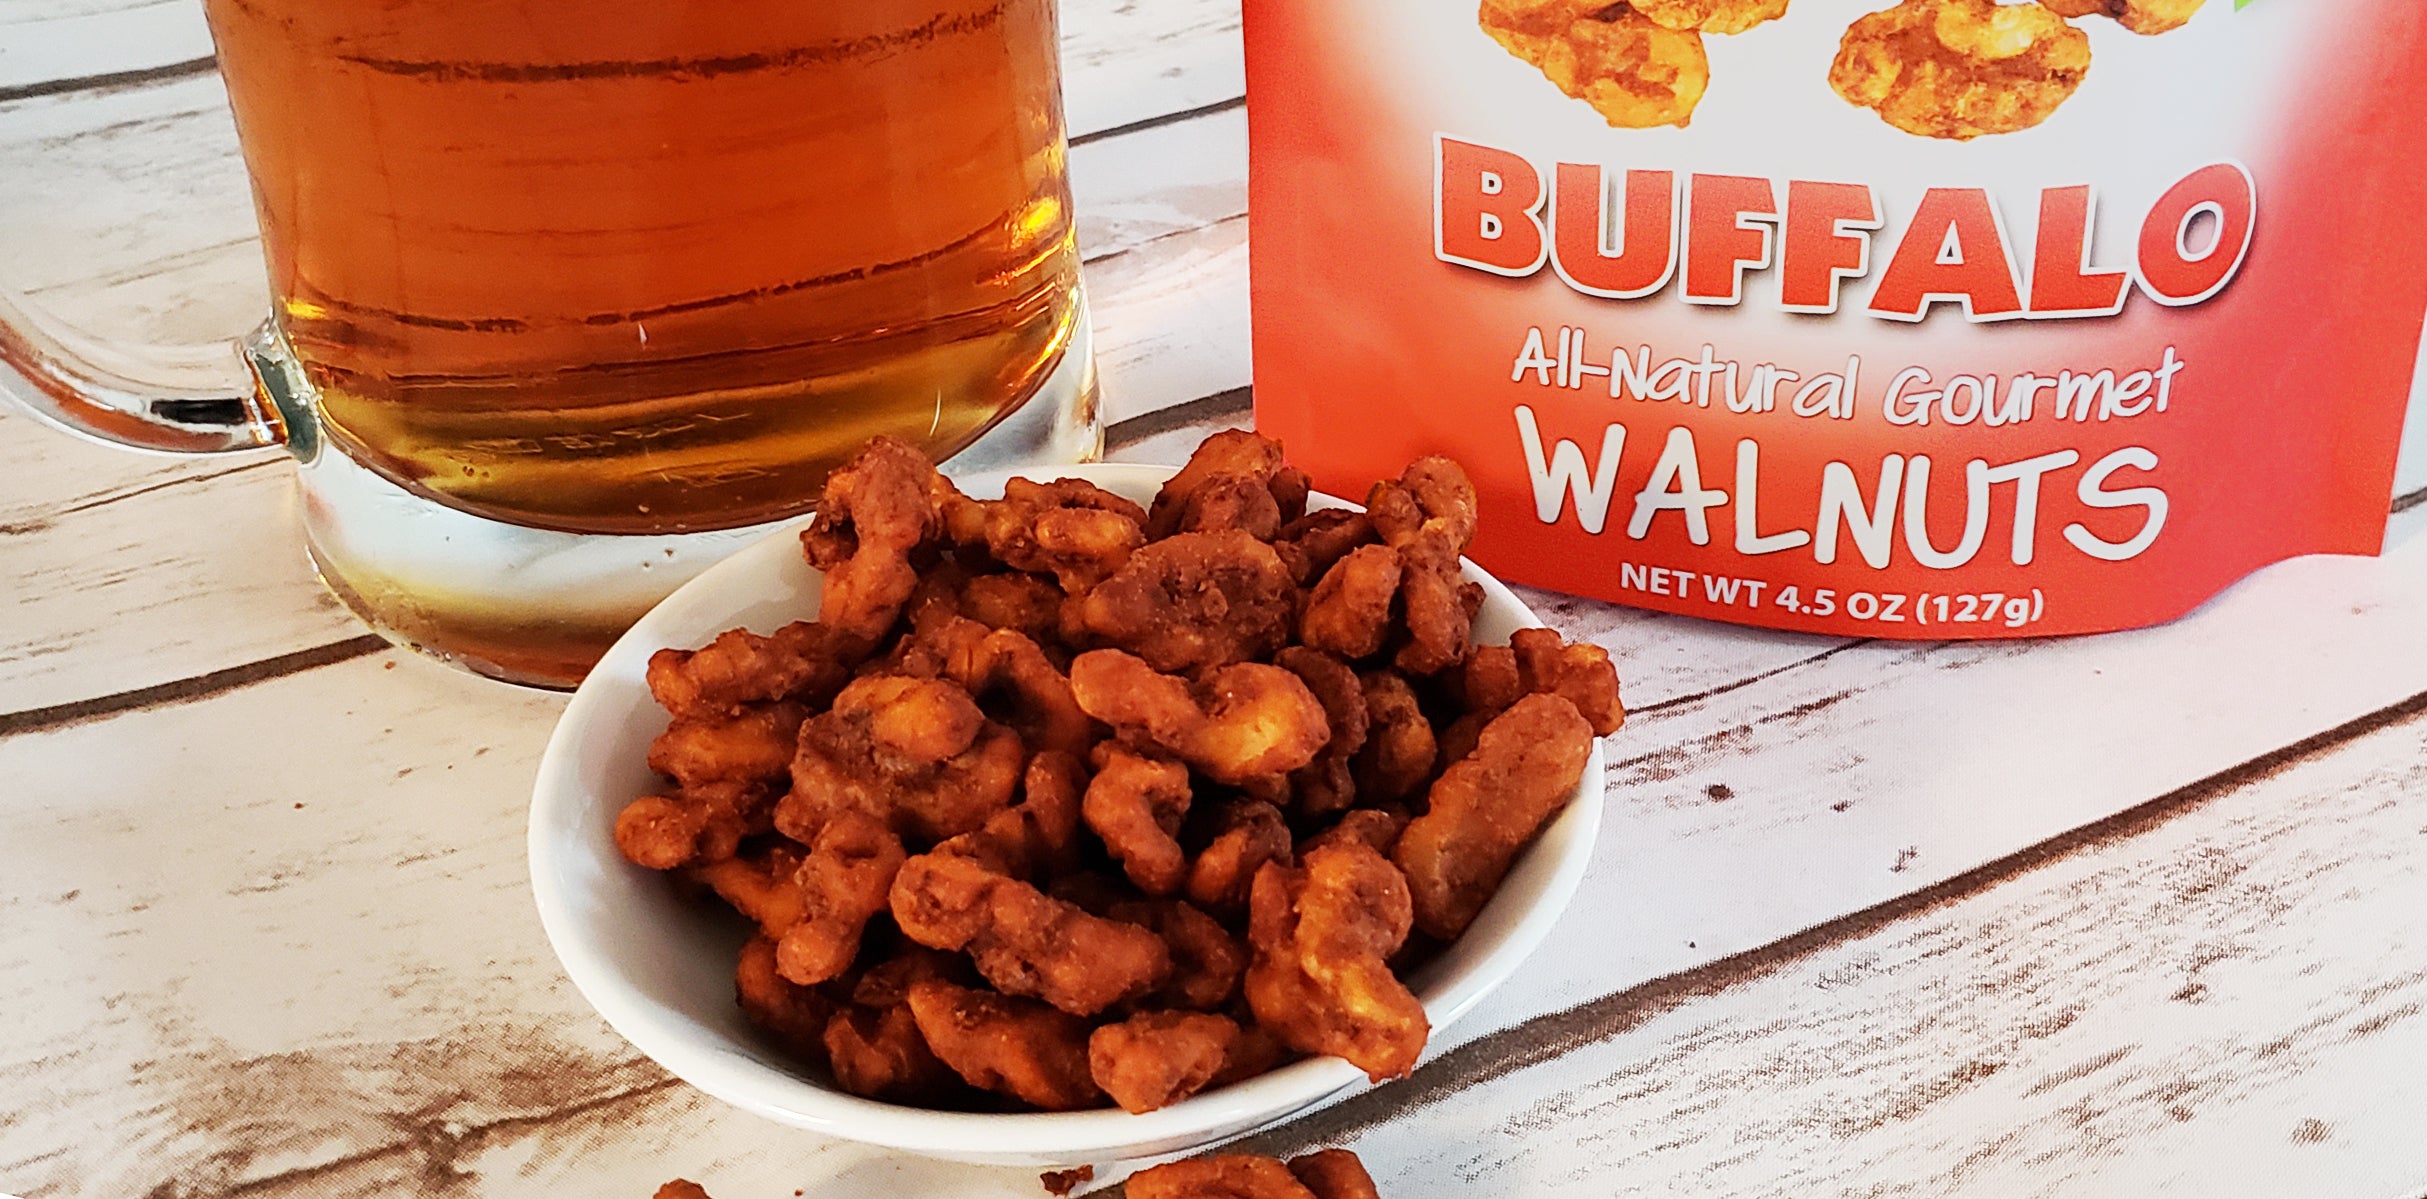 Buffalo seasoned walnut snacks paired with your favorite beer